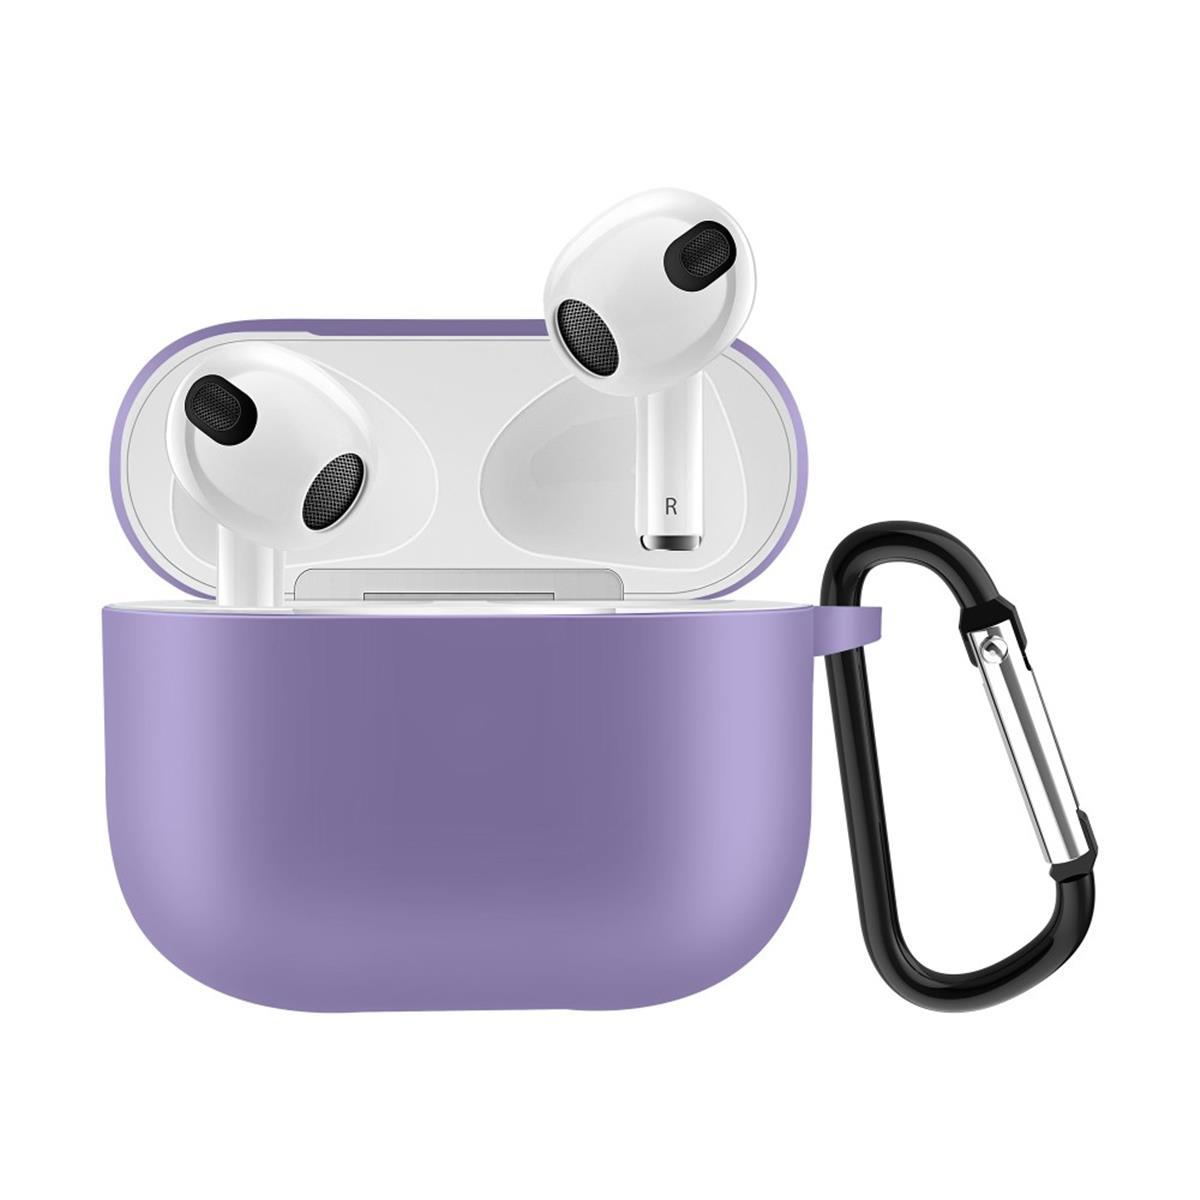 Lila, für AirPods Damen, Silikoncover Apple 3 Ladecase 76811 COVERKINGZ